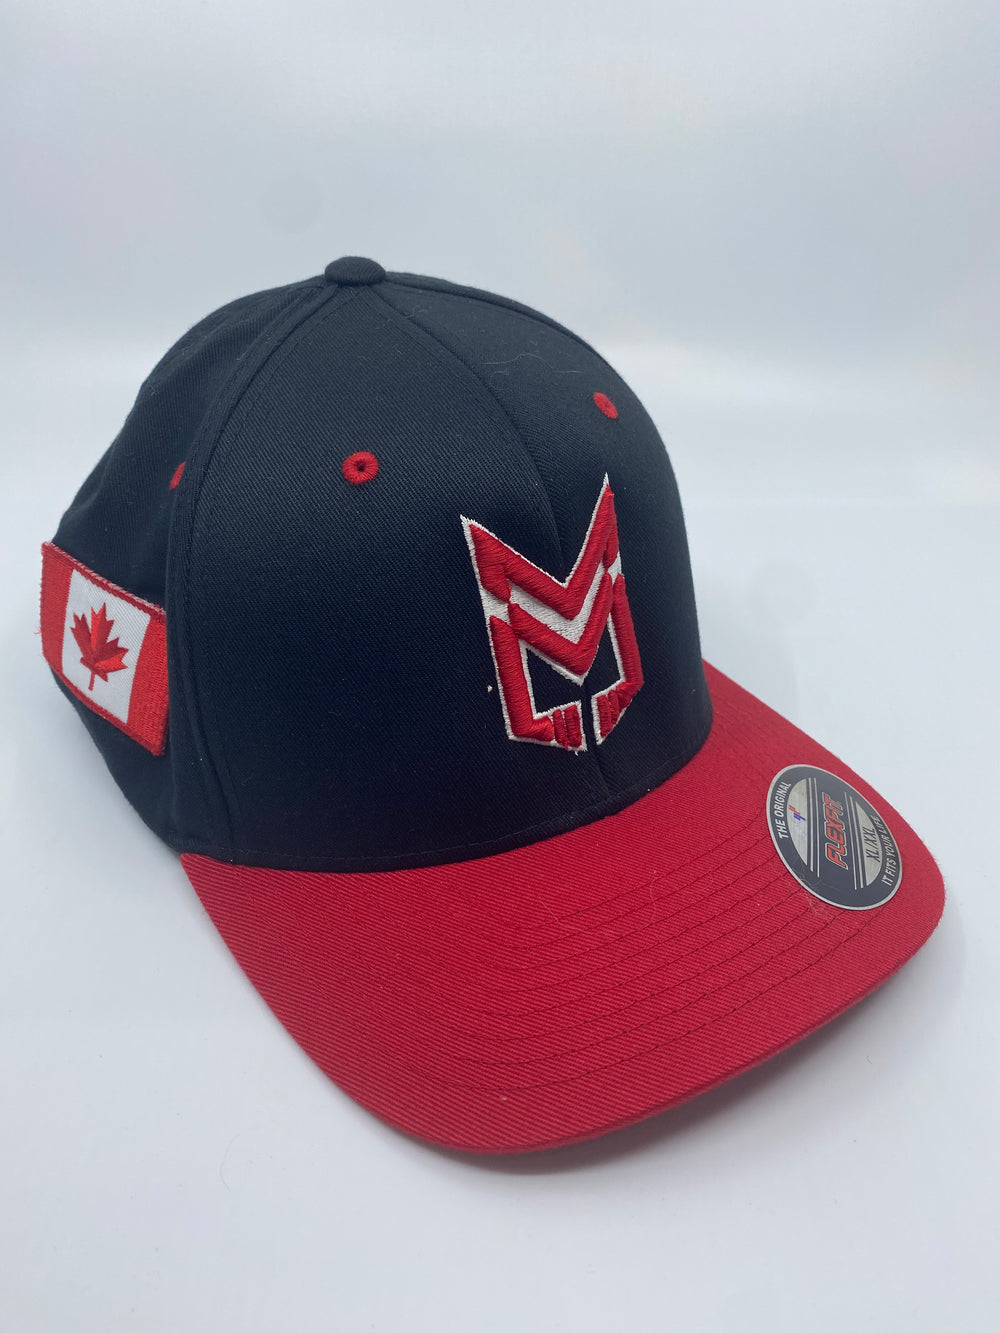 Marner MM Black and Red Hat